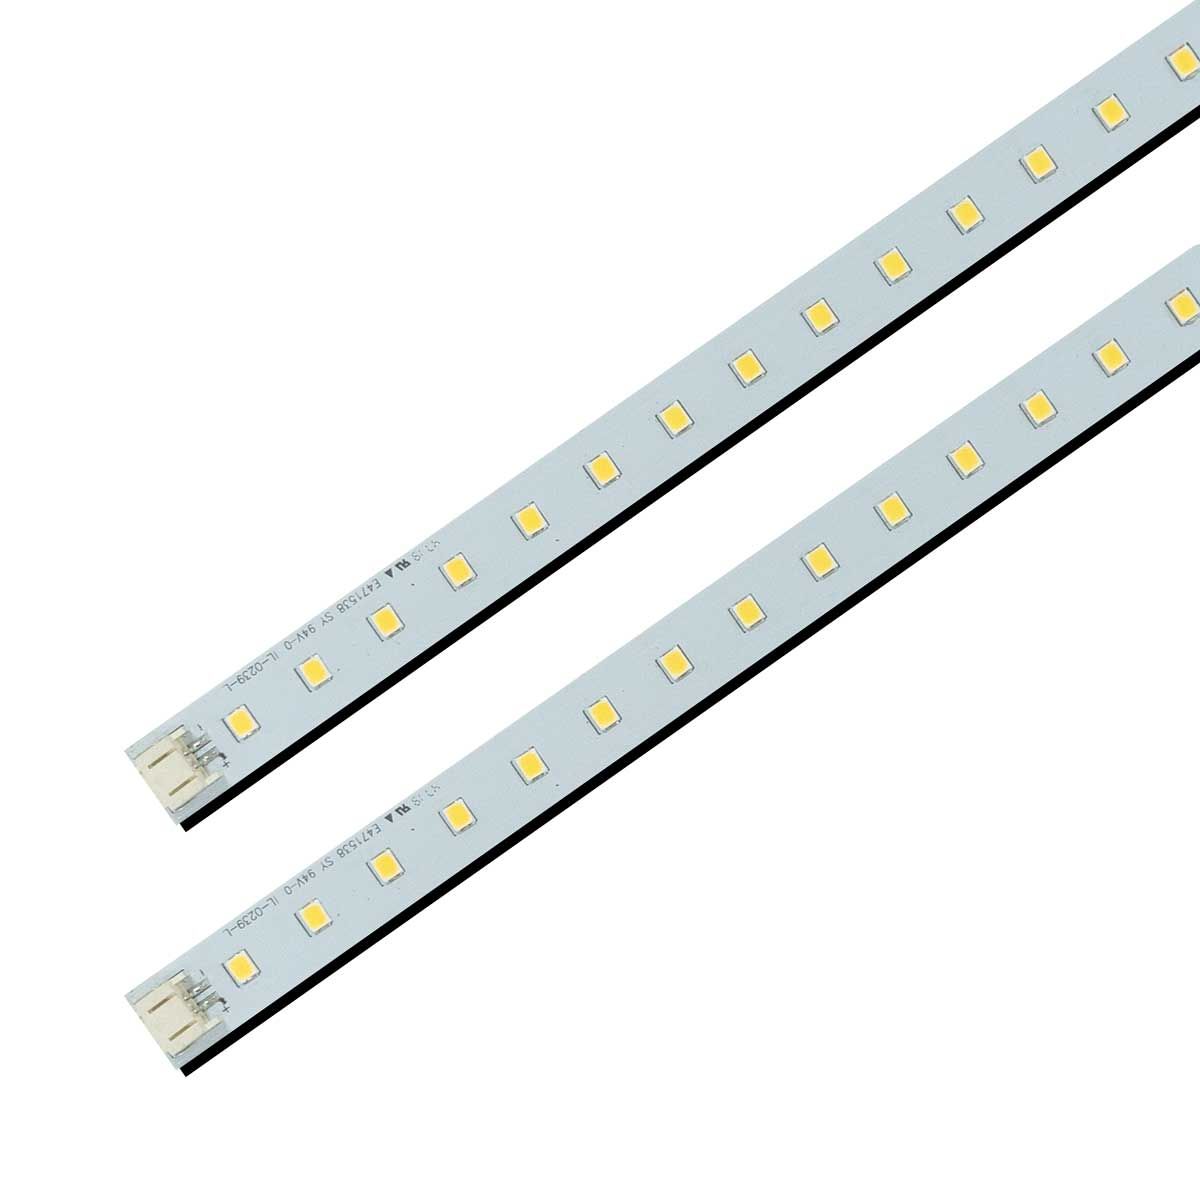 Fluorescent Lights To Led, How To Install A Surface Mounted Fluorescent Light Fixture